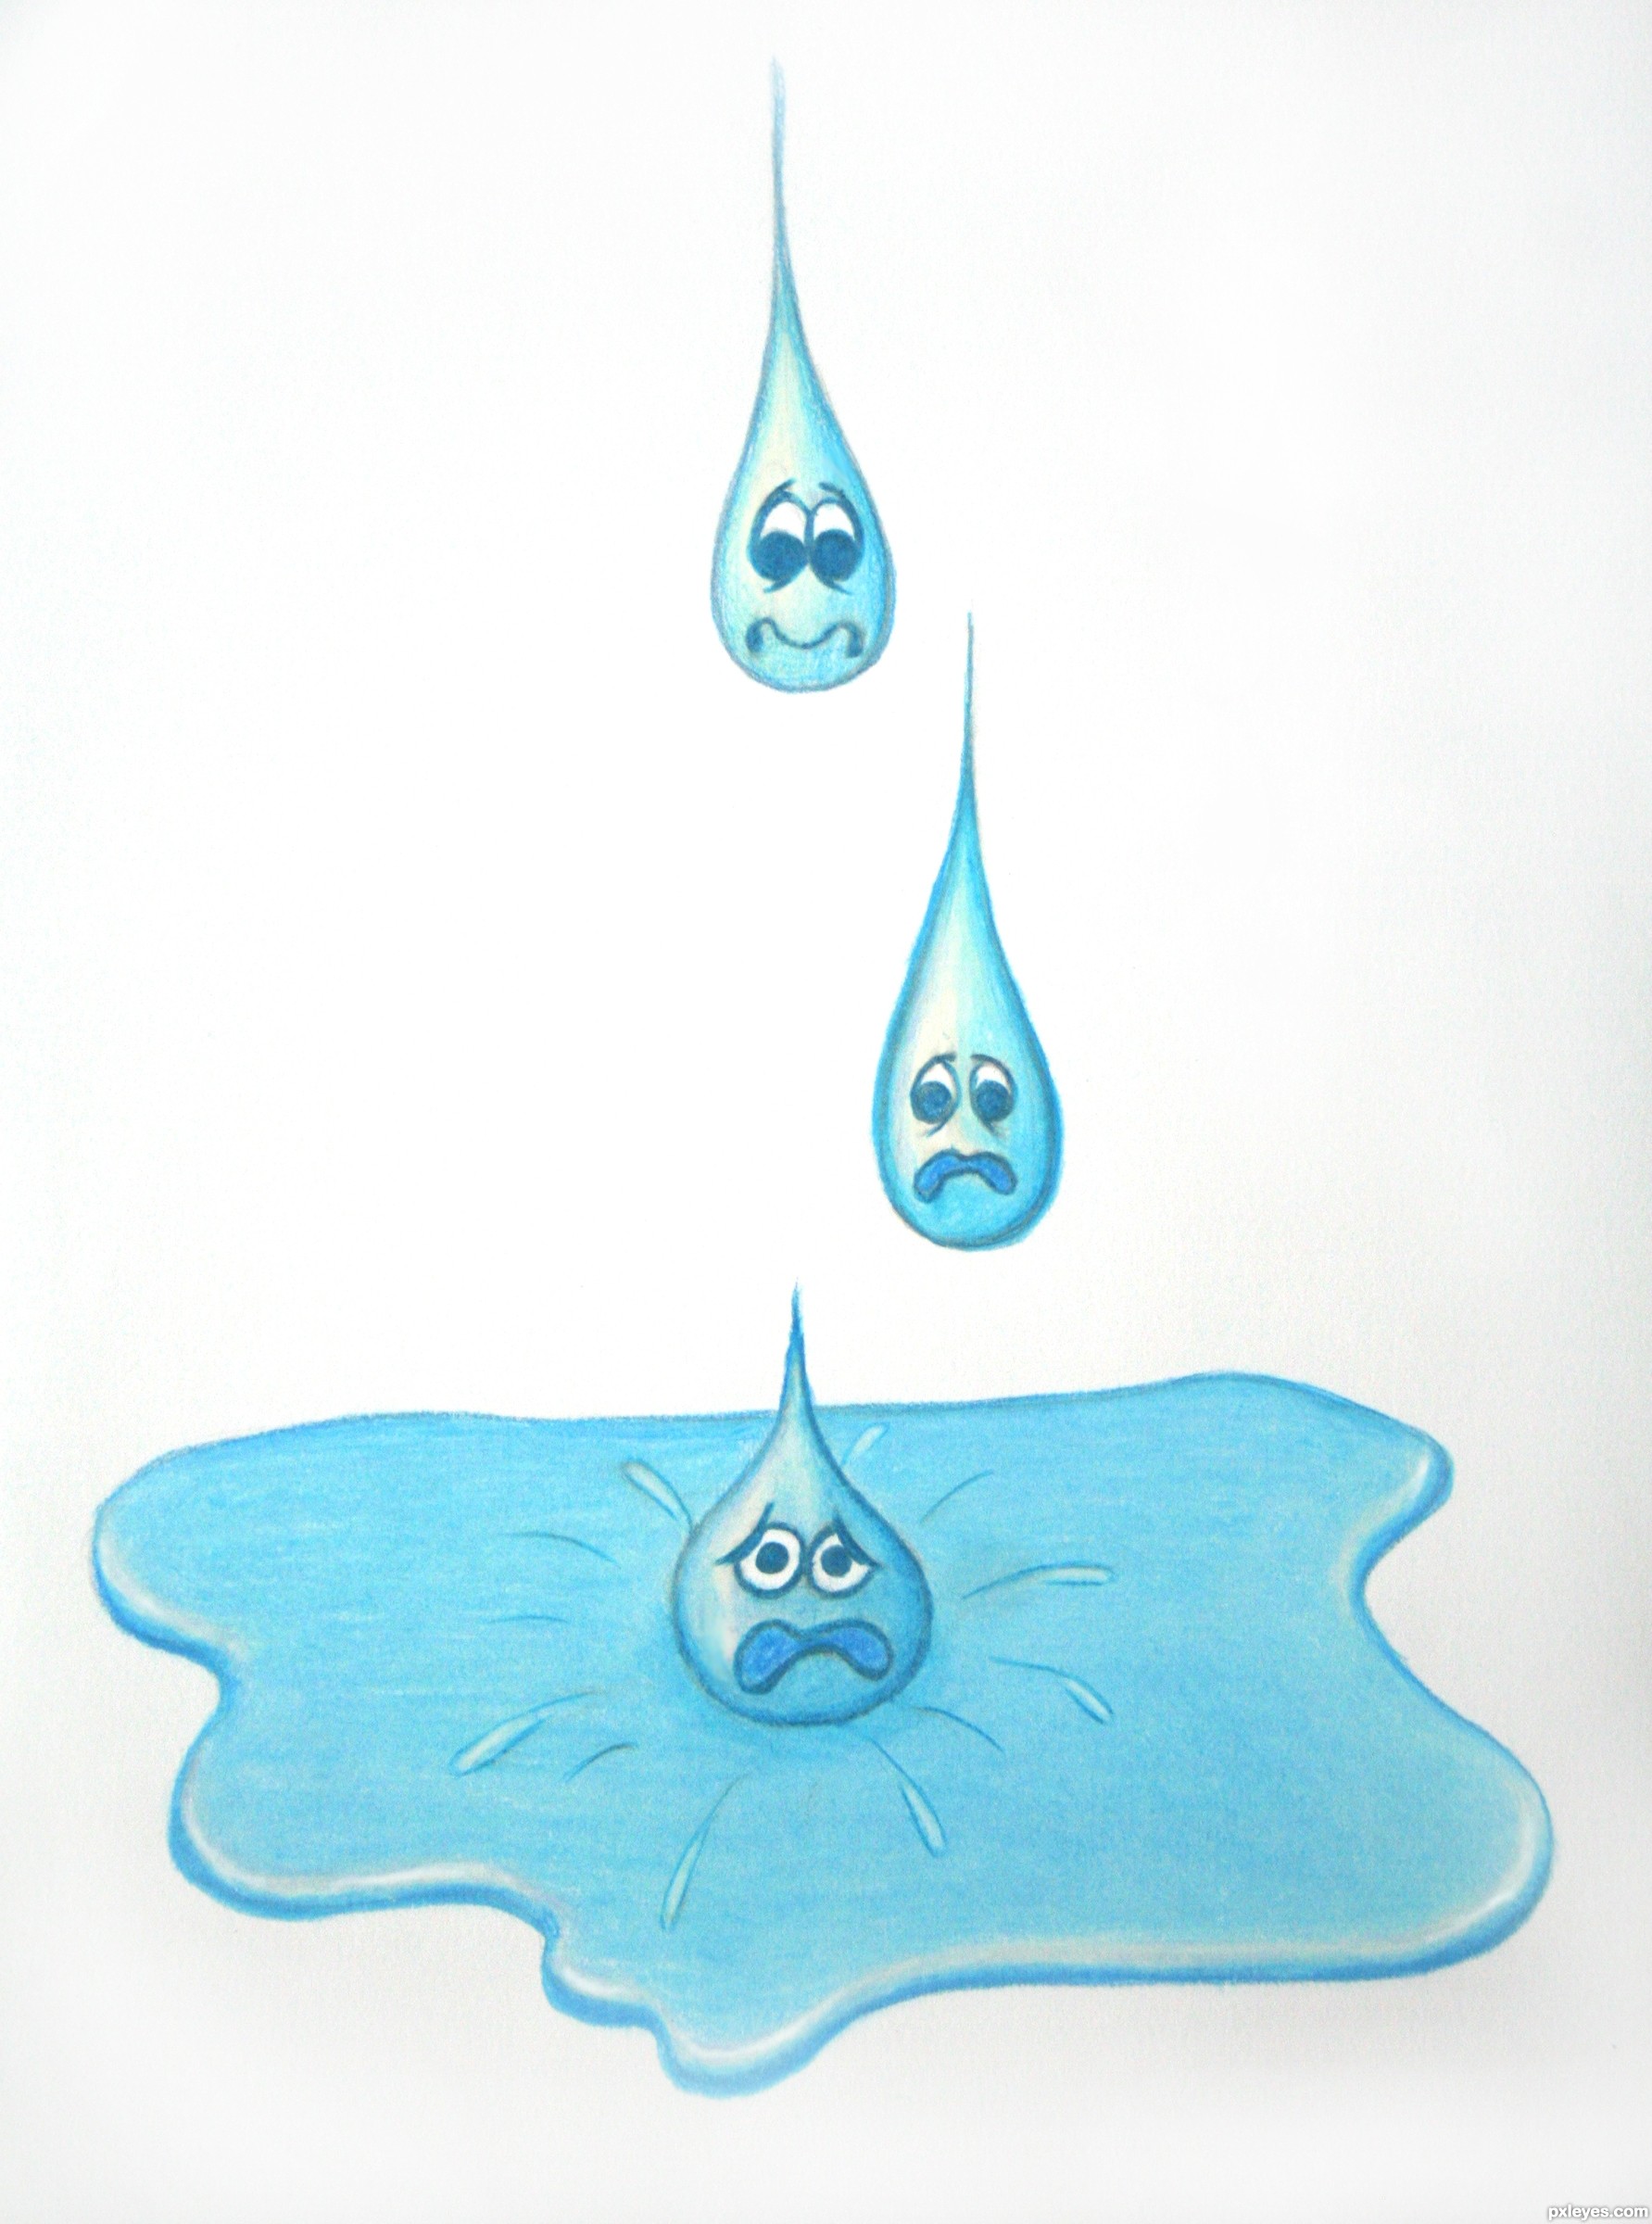 Drip Drip Drop picture, by artbybambi for: water td drawing contest ...